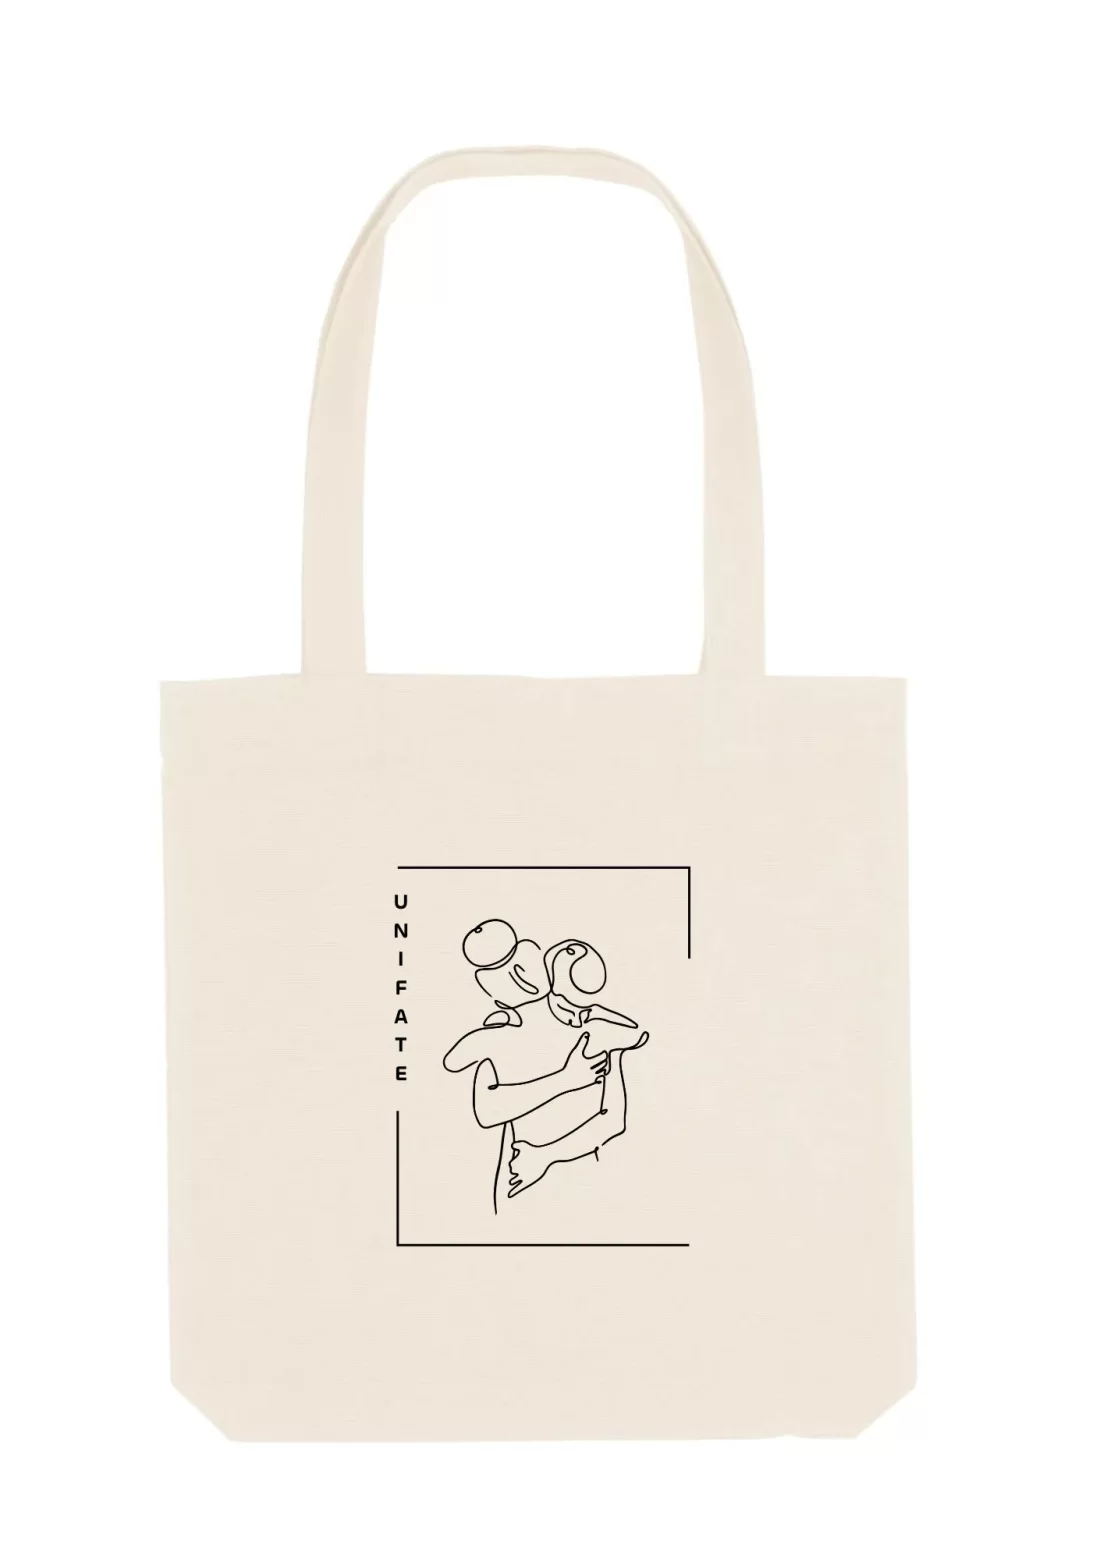 unifate-marque-responsable-rennes-collection-humanitaire-ete-tote-bag-blanc-recto